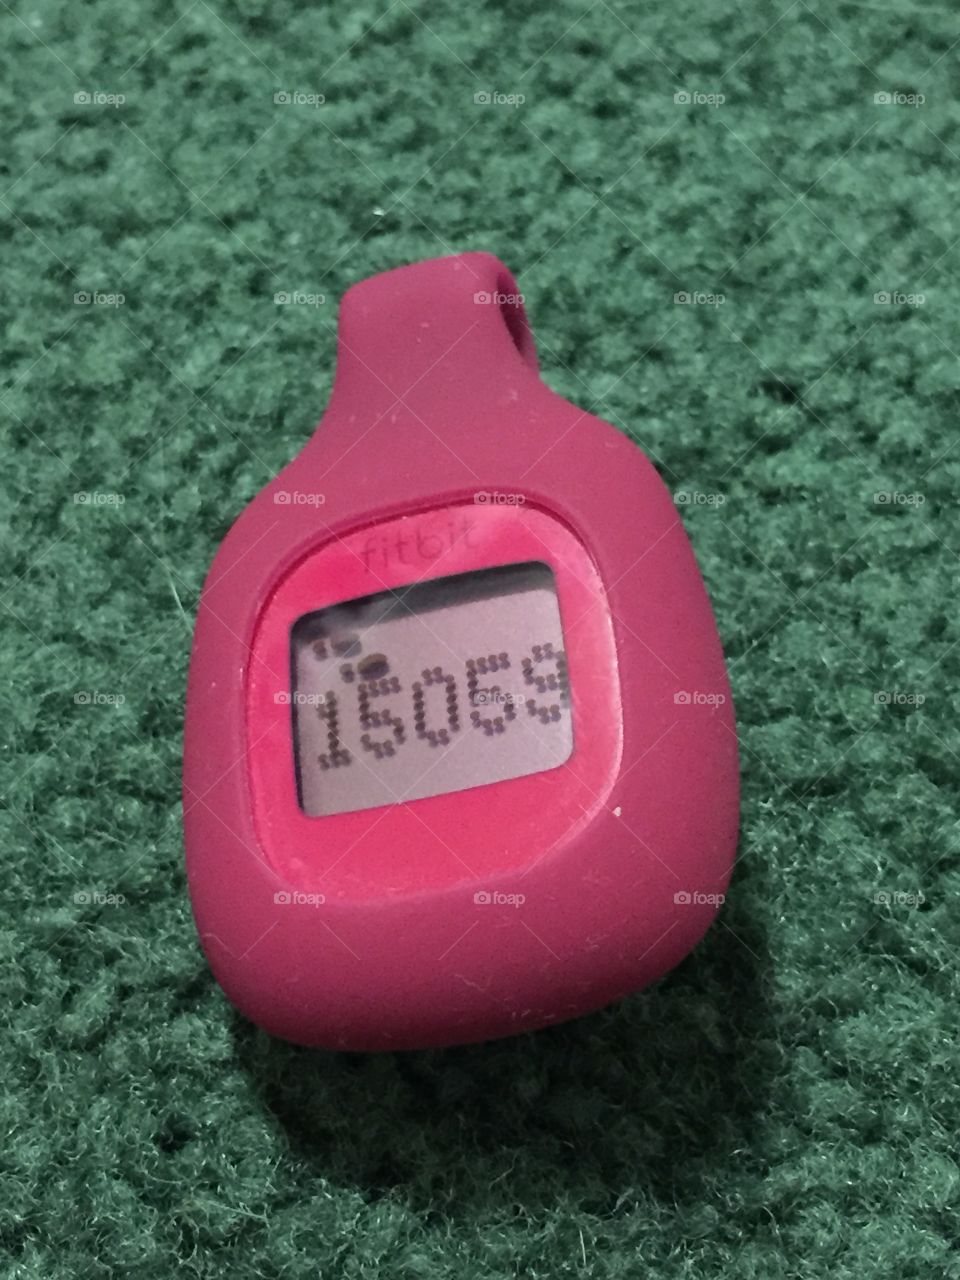 Fitbit. Got this new pedometer.  It seems much more accurate